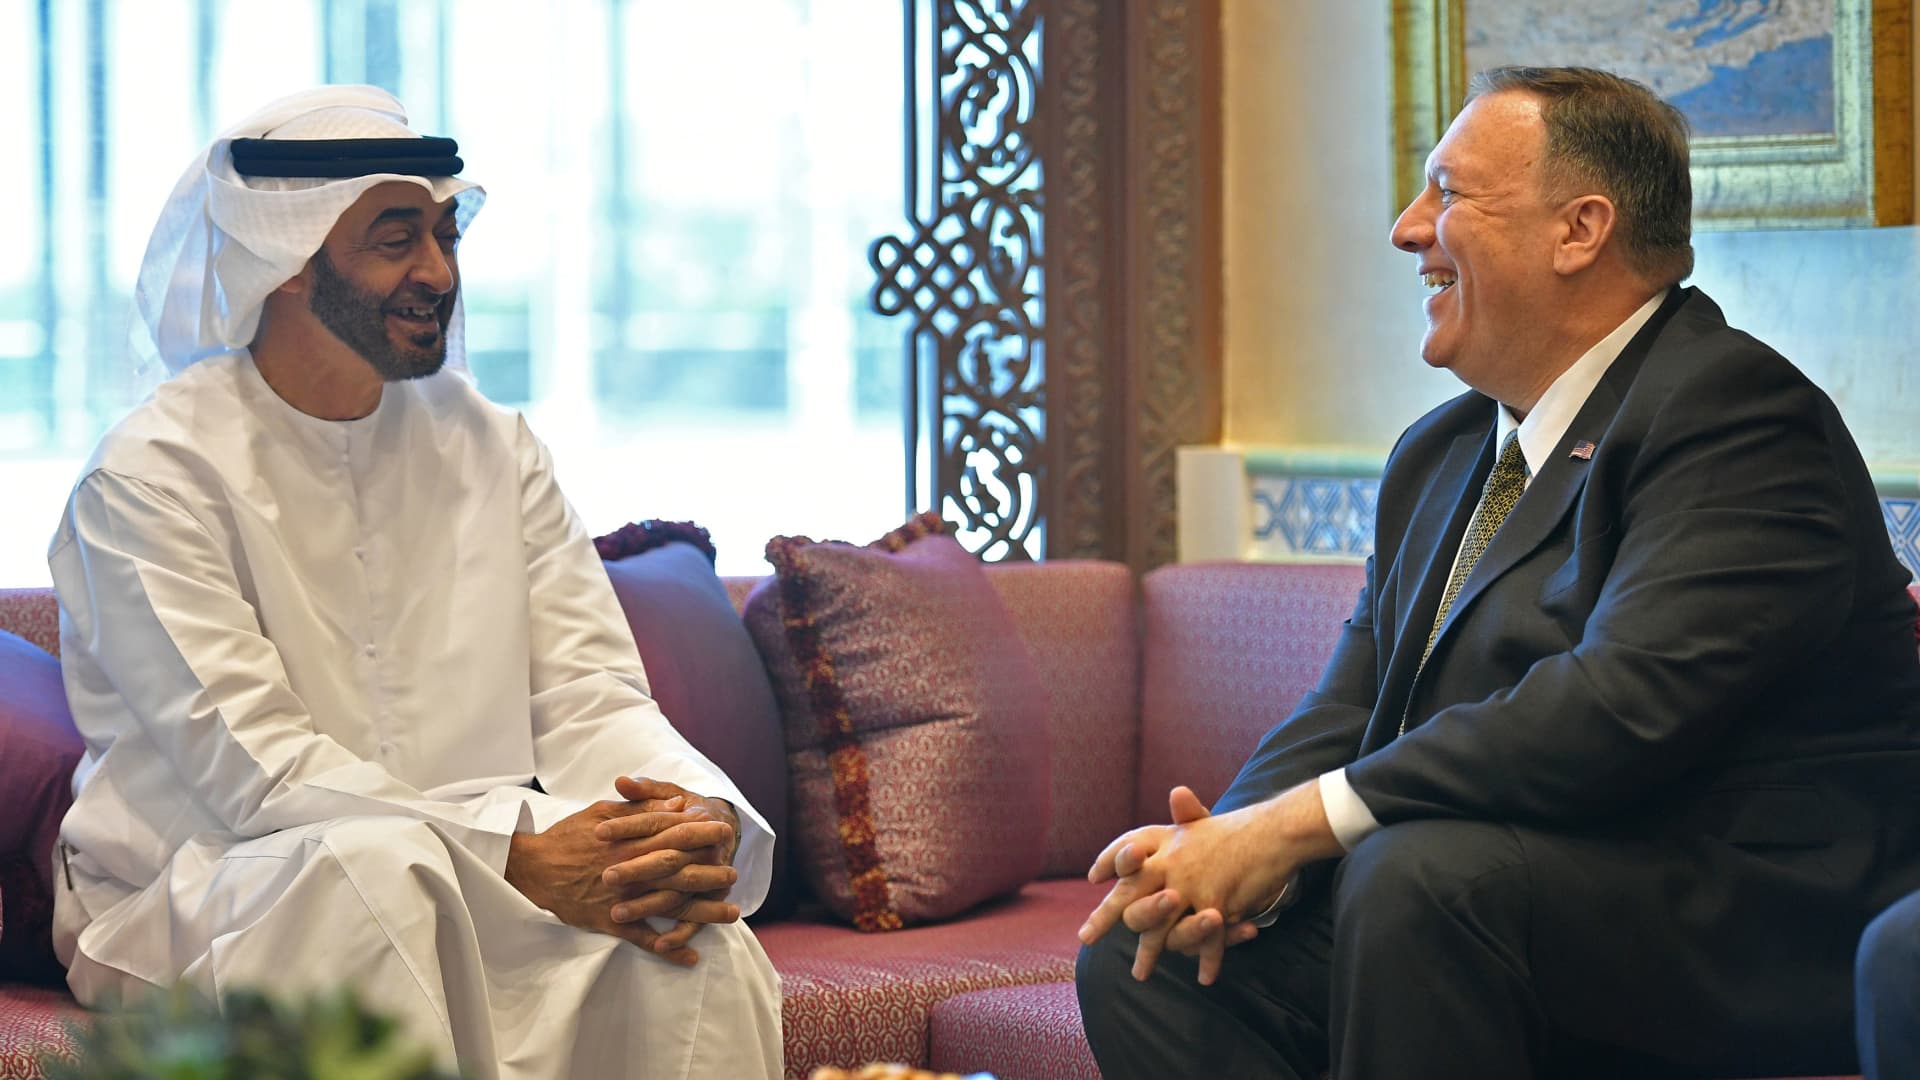 U.S. Secretary of State Mike Pompeo takes part in a meeting with Abu Dhabi Crown Prince Mohammed bin Zayed al-Nahyan in Abu Dhabi, United Arab Emirates September 19, 2019.